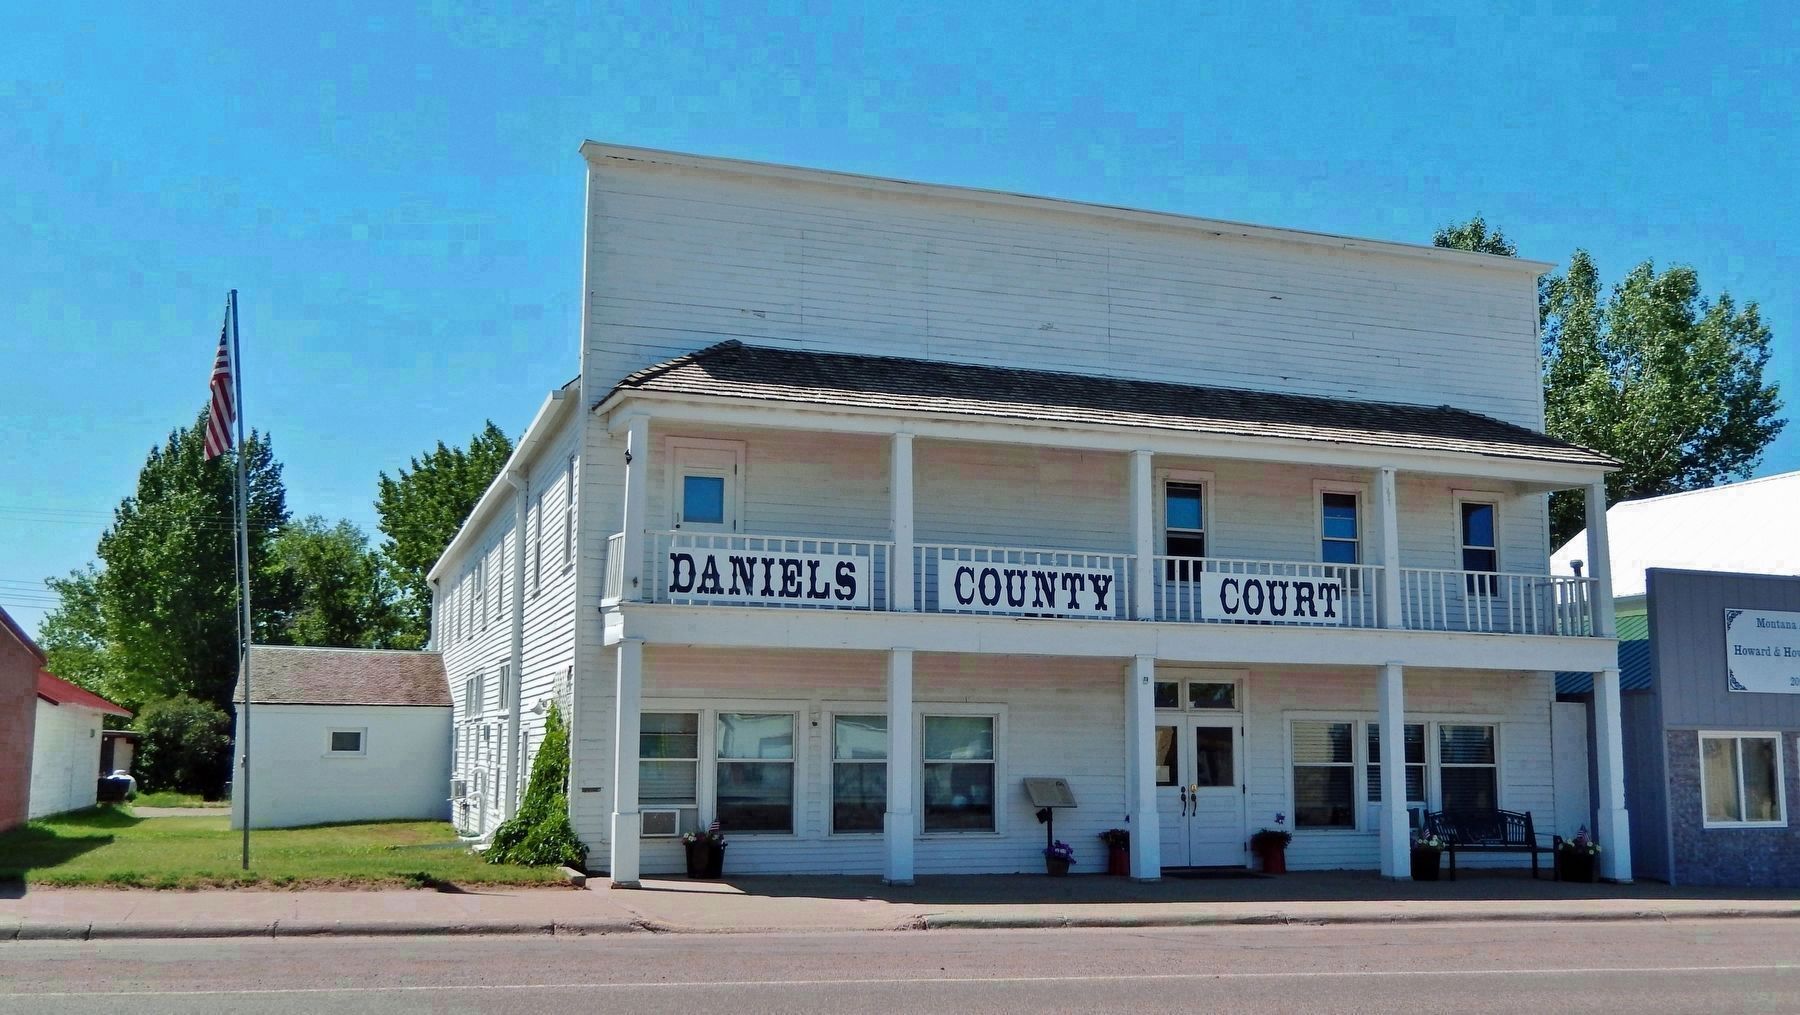 Daniels County Courthouse (<i>east/front elevation</i>) image. Click for full size.